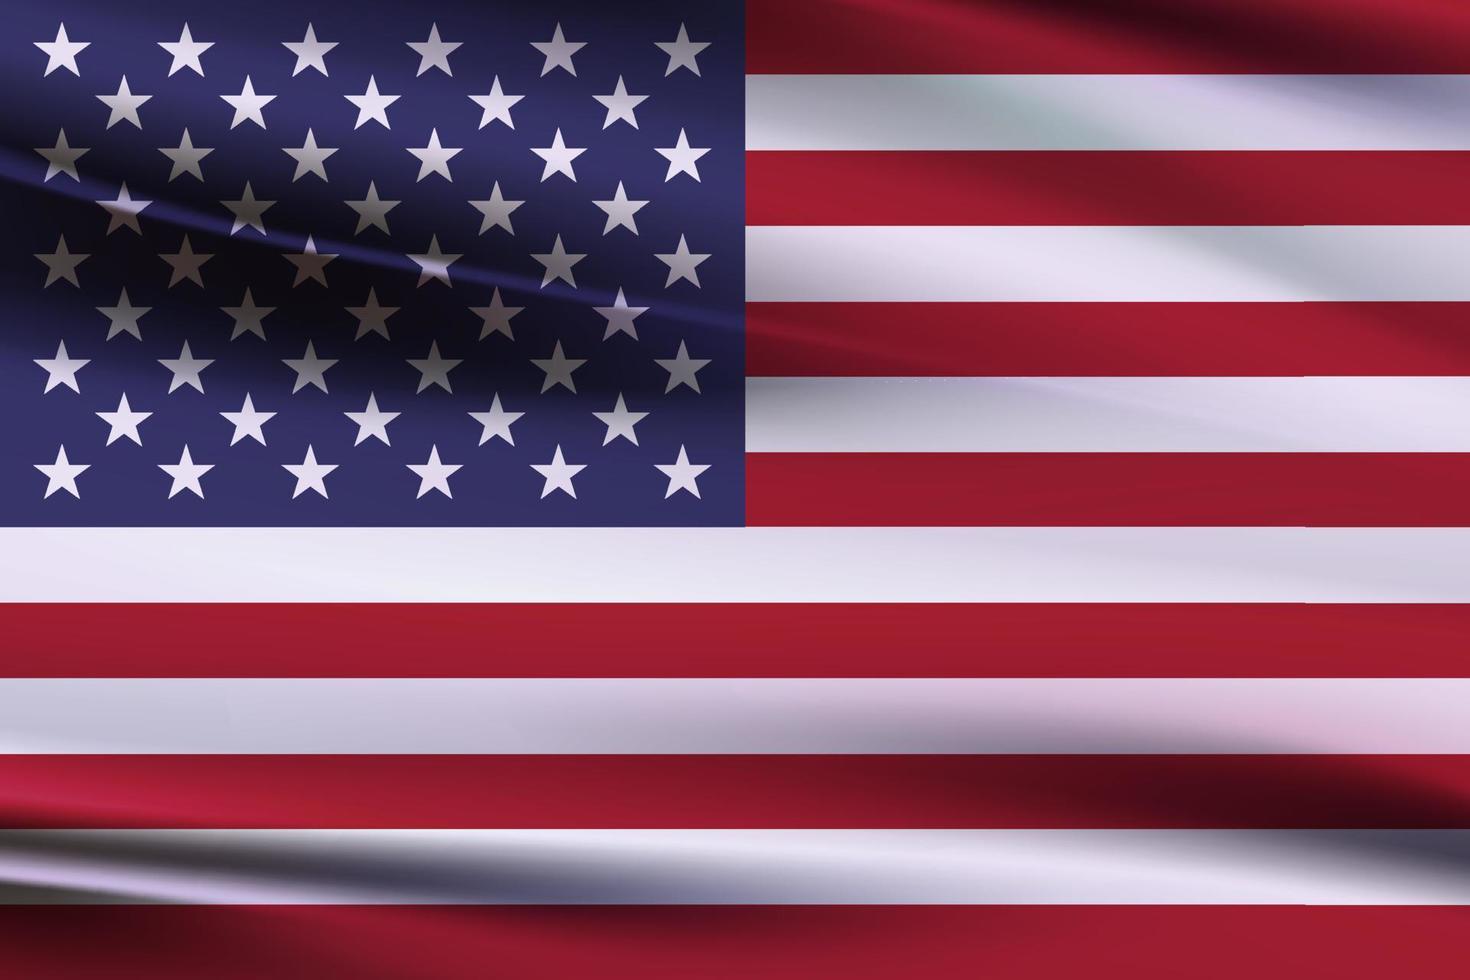 American Flag Blowing Close Up.3d United States American Flag. merican flag USA background, close up.vector image of american flag and American Flag Wave Close Up for Memorial Day vector